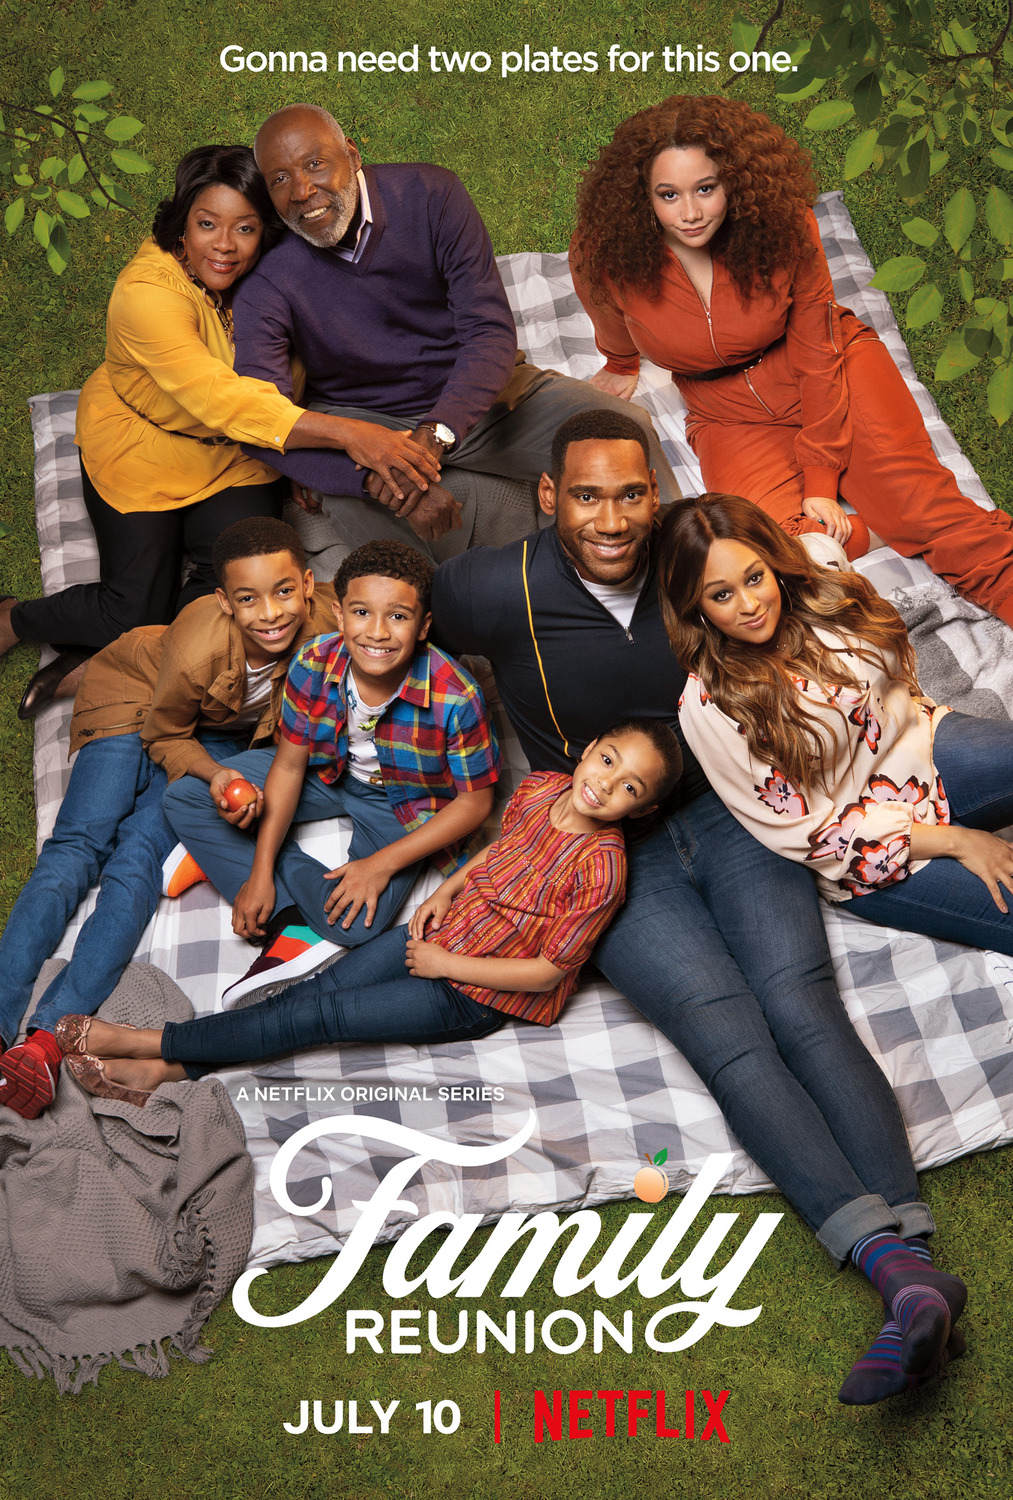 Extra Large TV Poster Image for Family Reunion (#1 of 2)